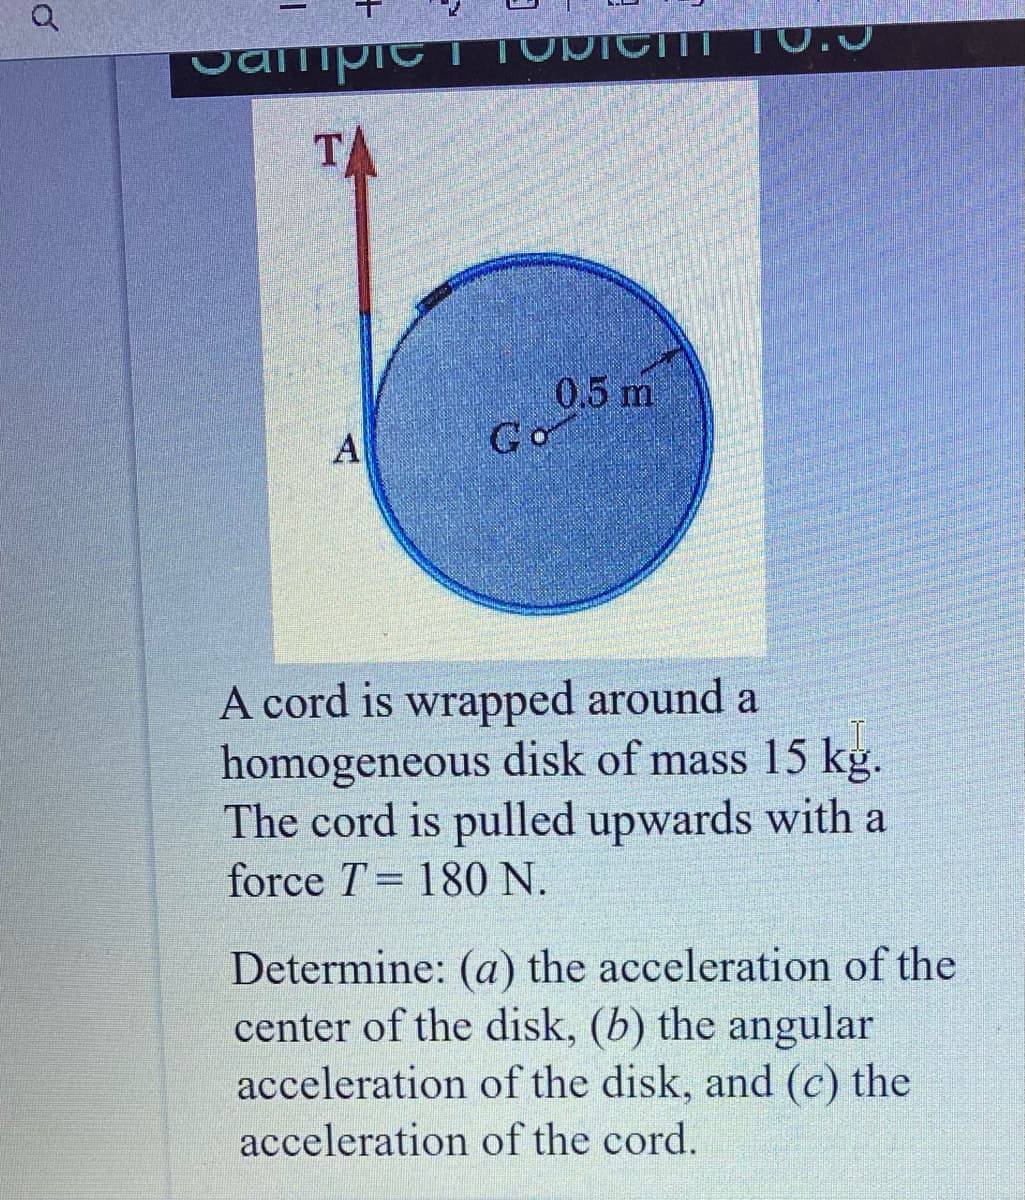 SampieTTONICITT T0.J
TA
0.5 m
Go
A
A cord is wrapped around a
homogeneous disk of mass 15 kg.
The cord is pulled upwards with a
force T= 180 N.
Determine: (a) the acceleration of the
center of the disk, (b) the angular
acceleration of the disk, and (c) the
acceleration of the cord.
